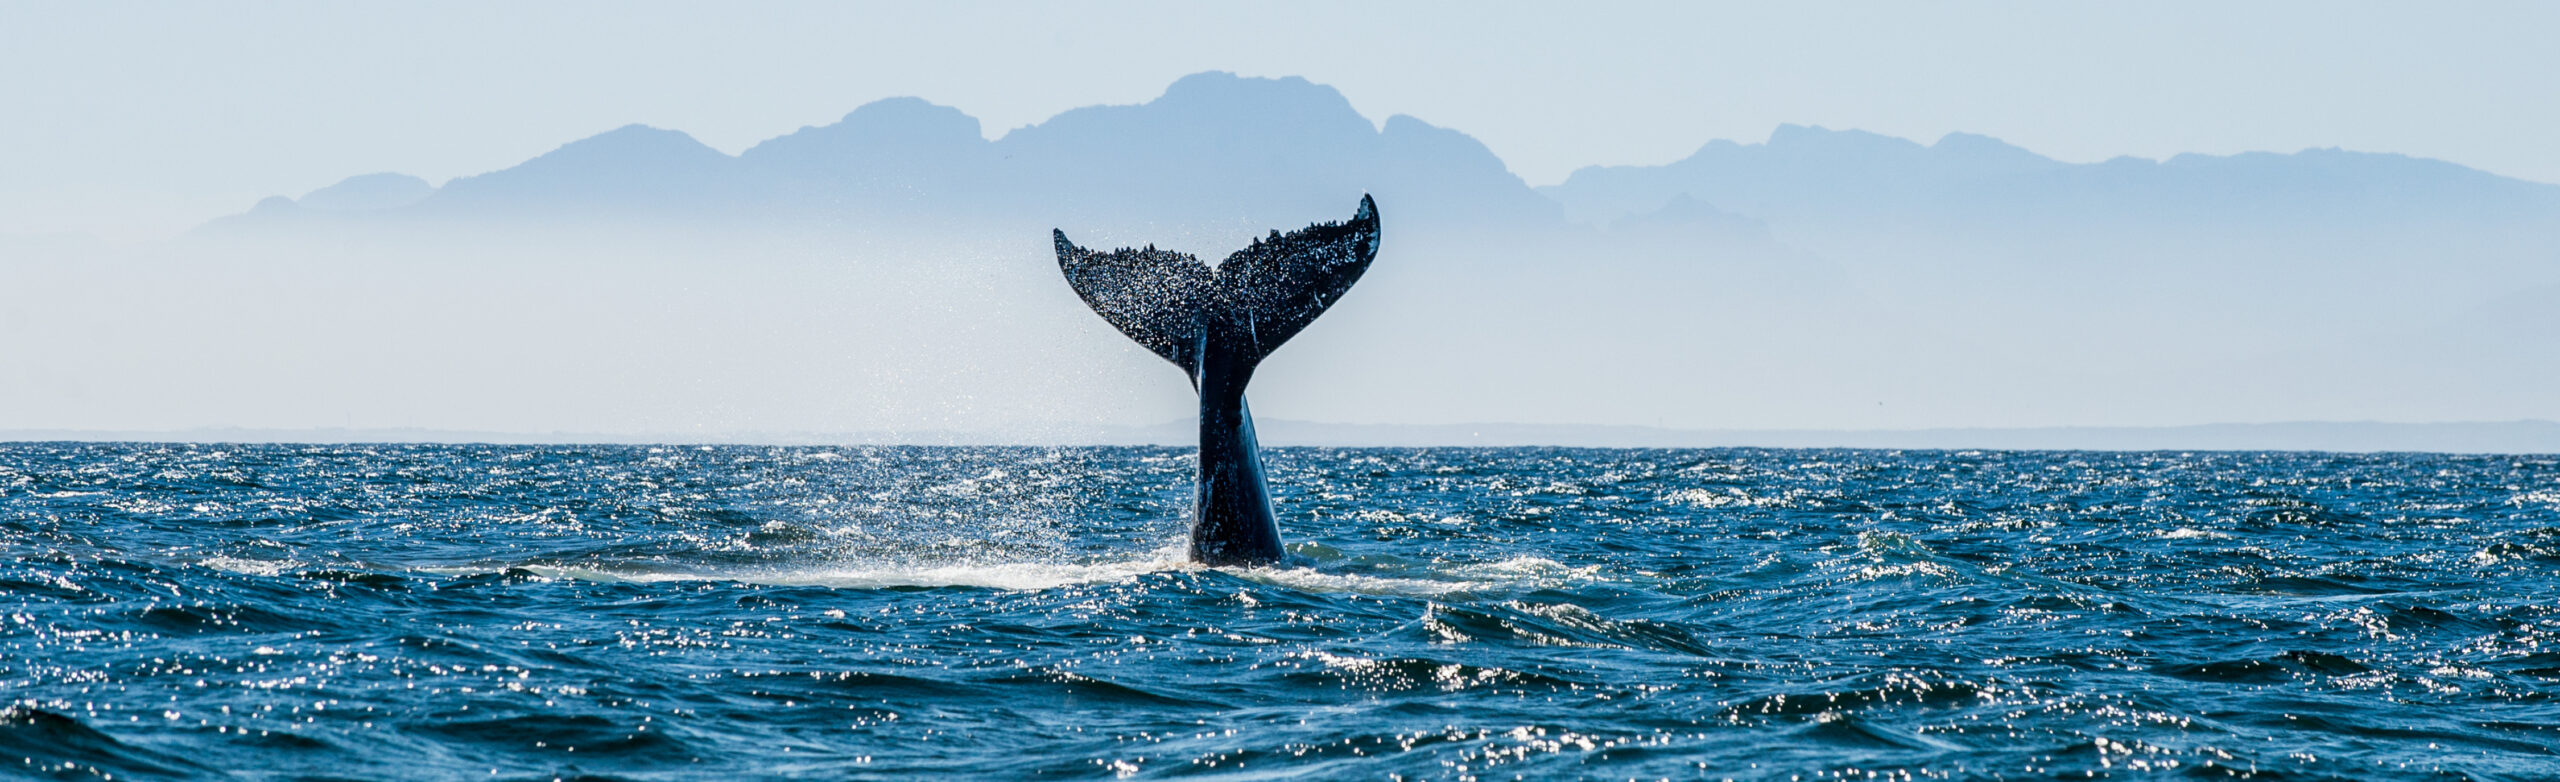 Flights to British Columbia, A Whales tail surfacing while diving into the pacific ocean